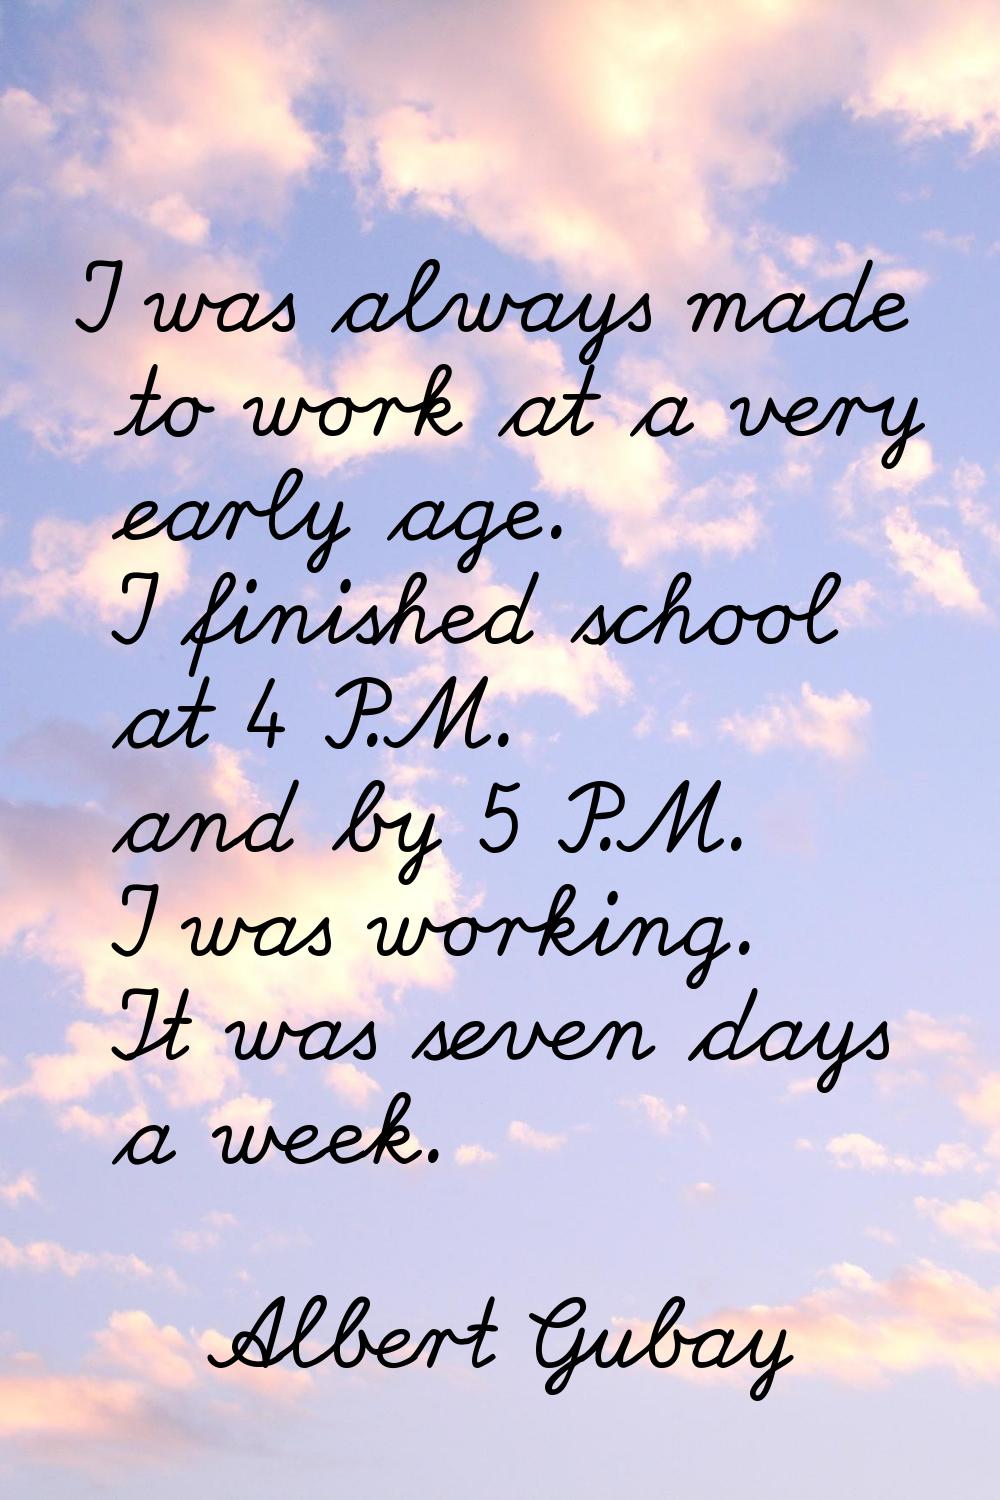 I was always made to work at a very early age. I finished school at 4 P.M. and by 5 P.M. I was work